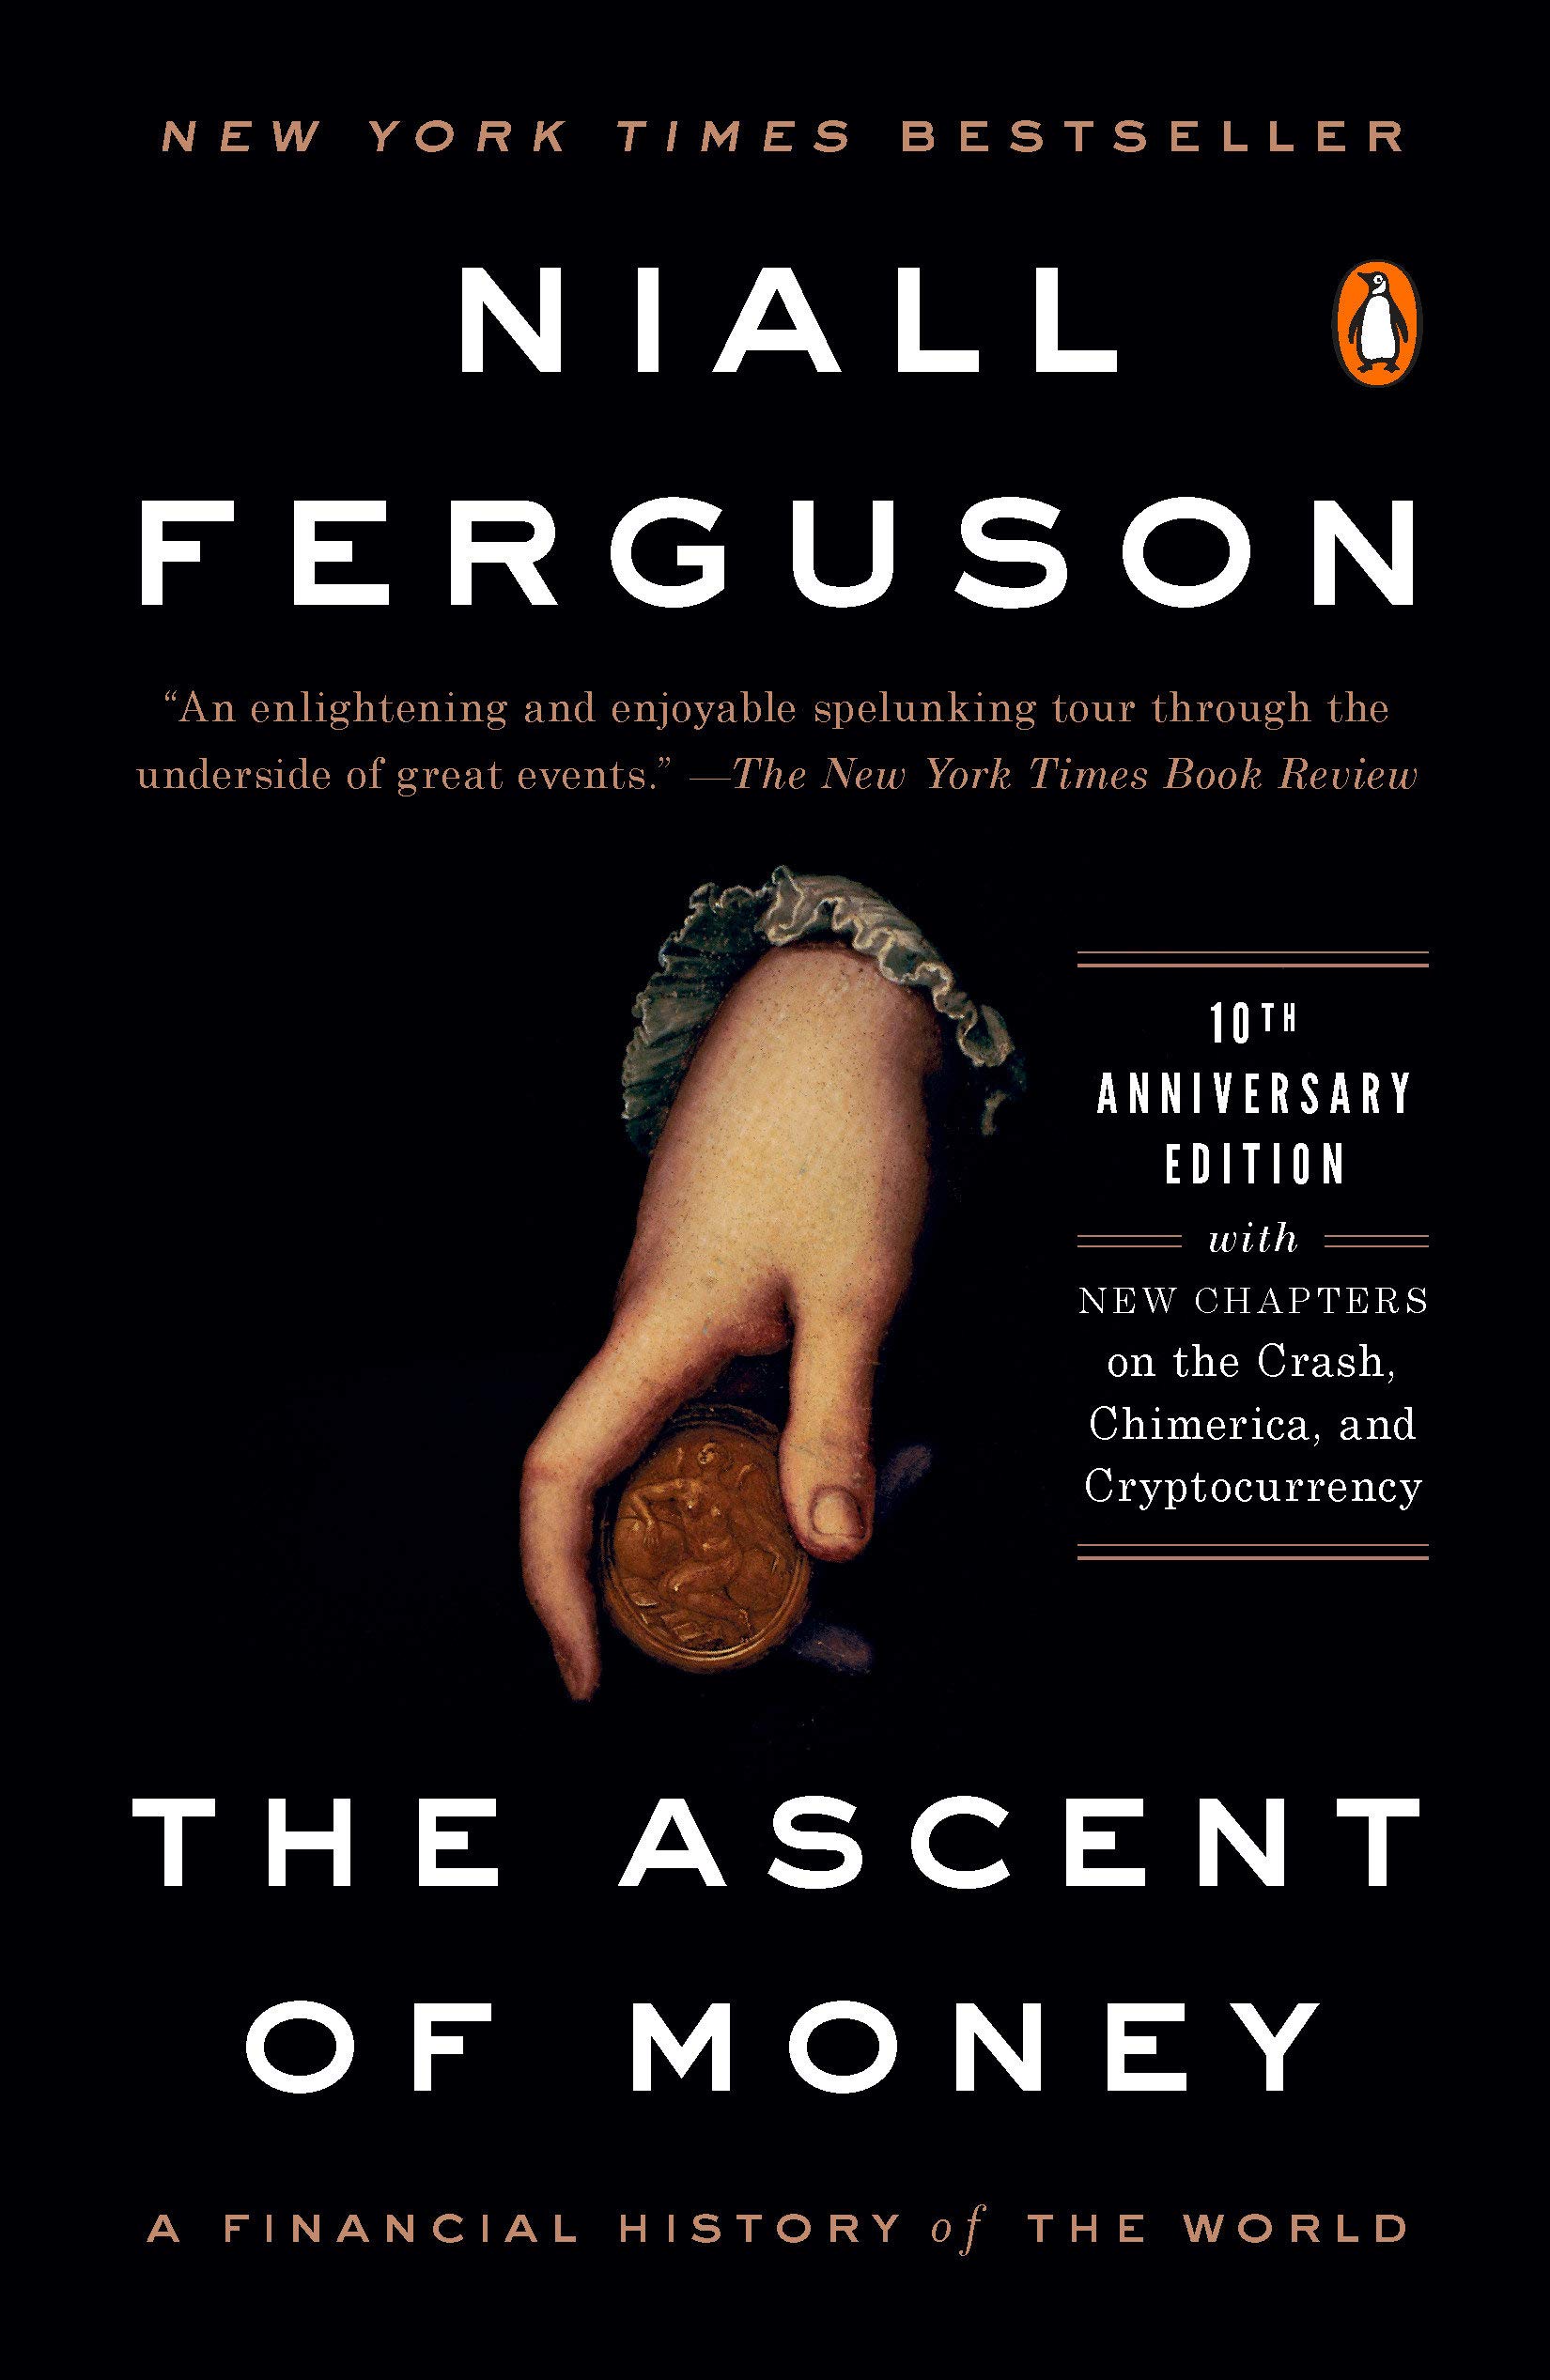 the ascent of money a financial history of the world